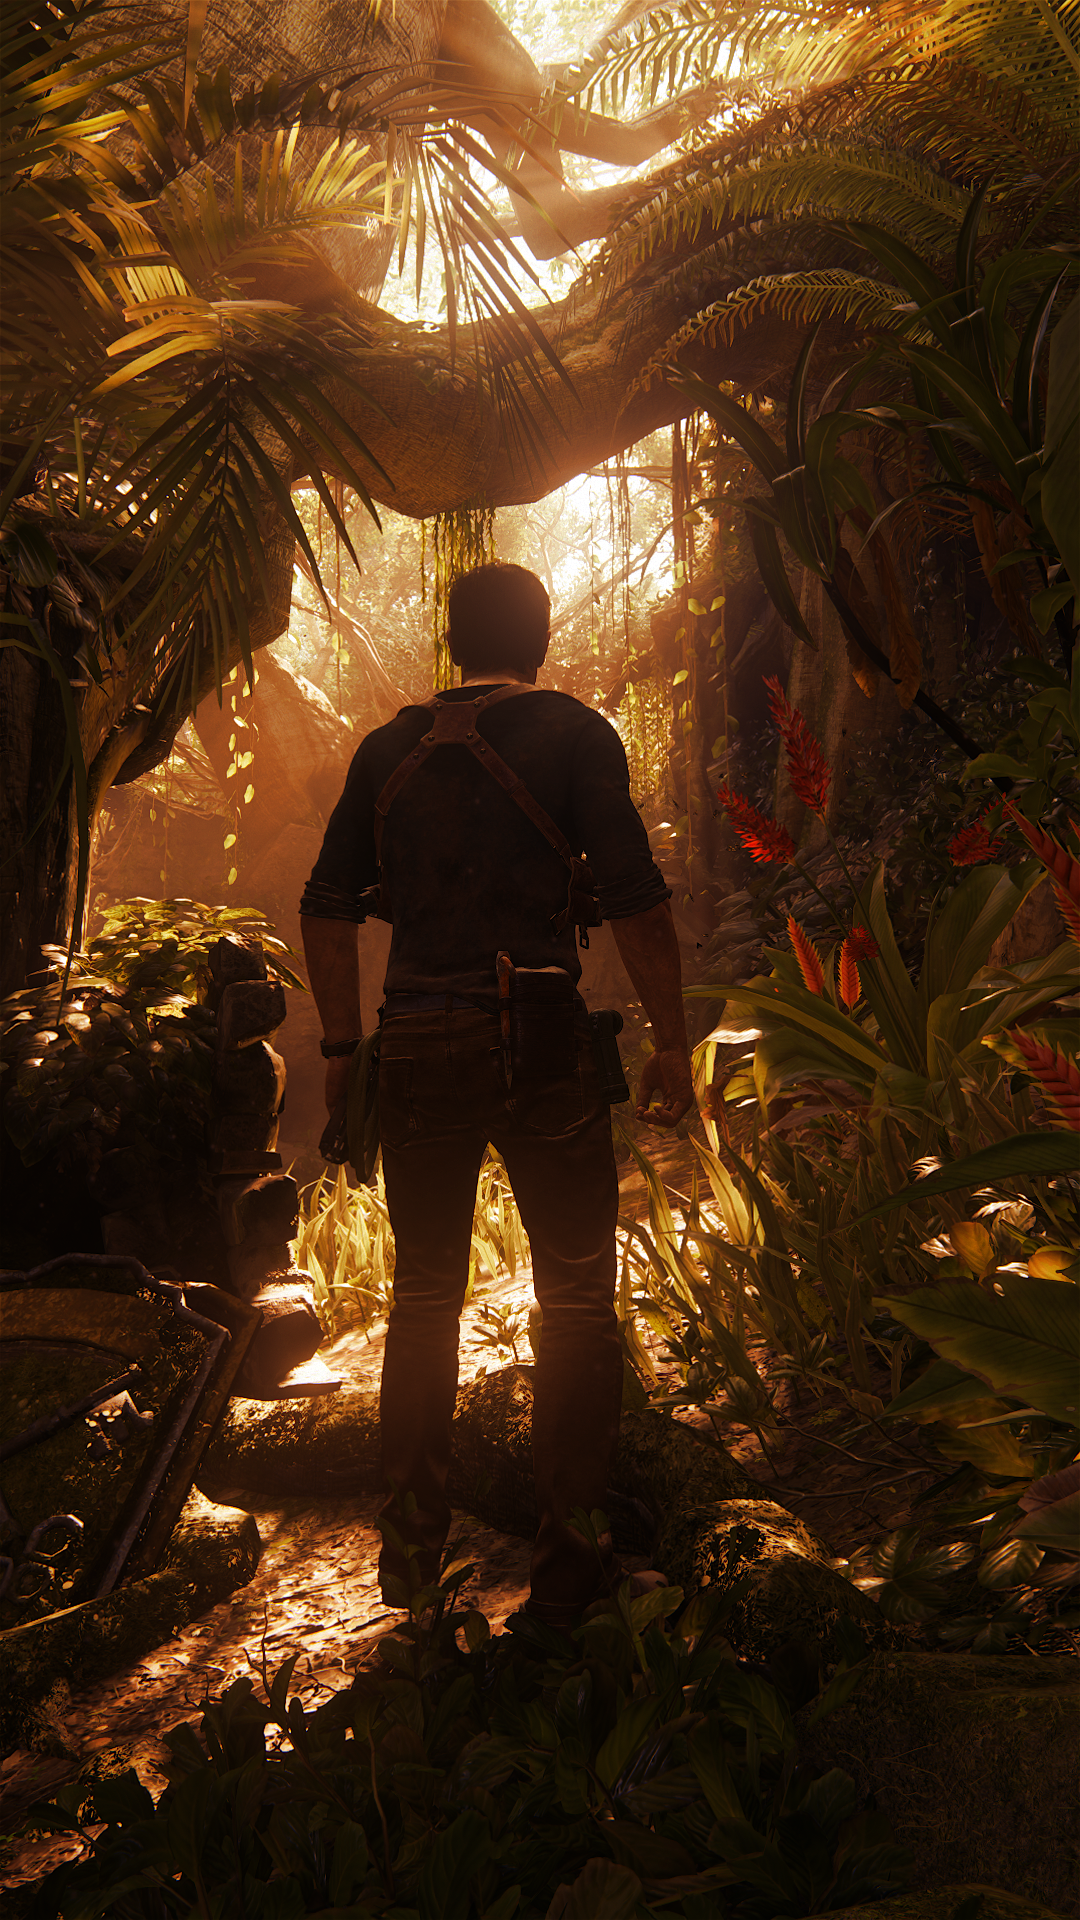 Uncharted 4 Pictures »Hupages» Скачать iPhone Wallpapers | Uncharted Eestheatic, Uncharted Game, Uncharted